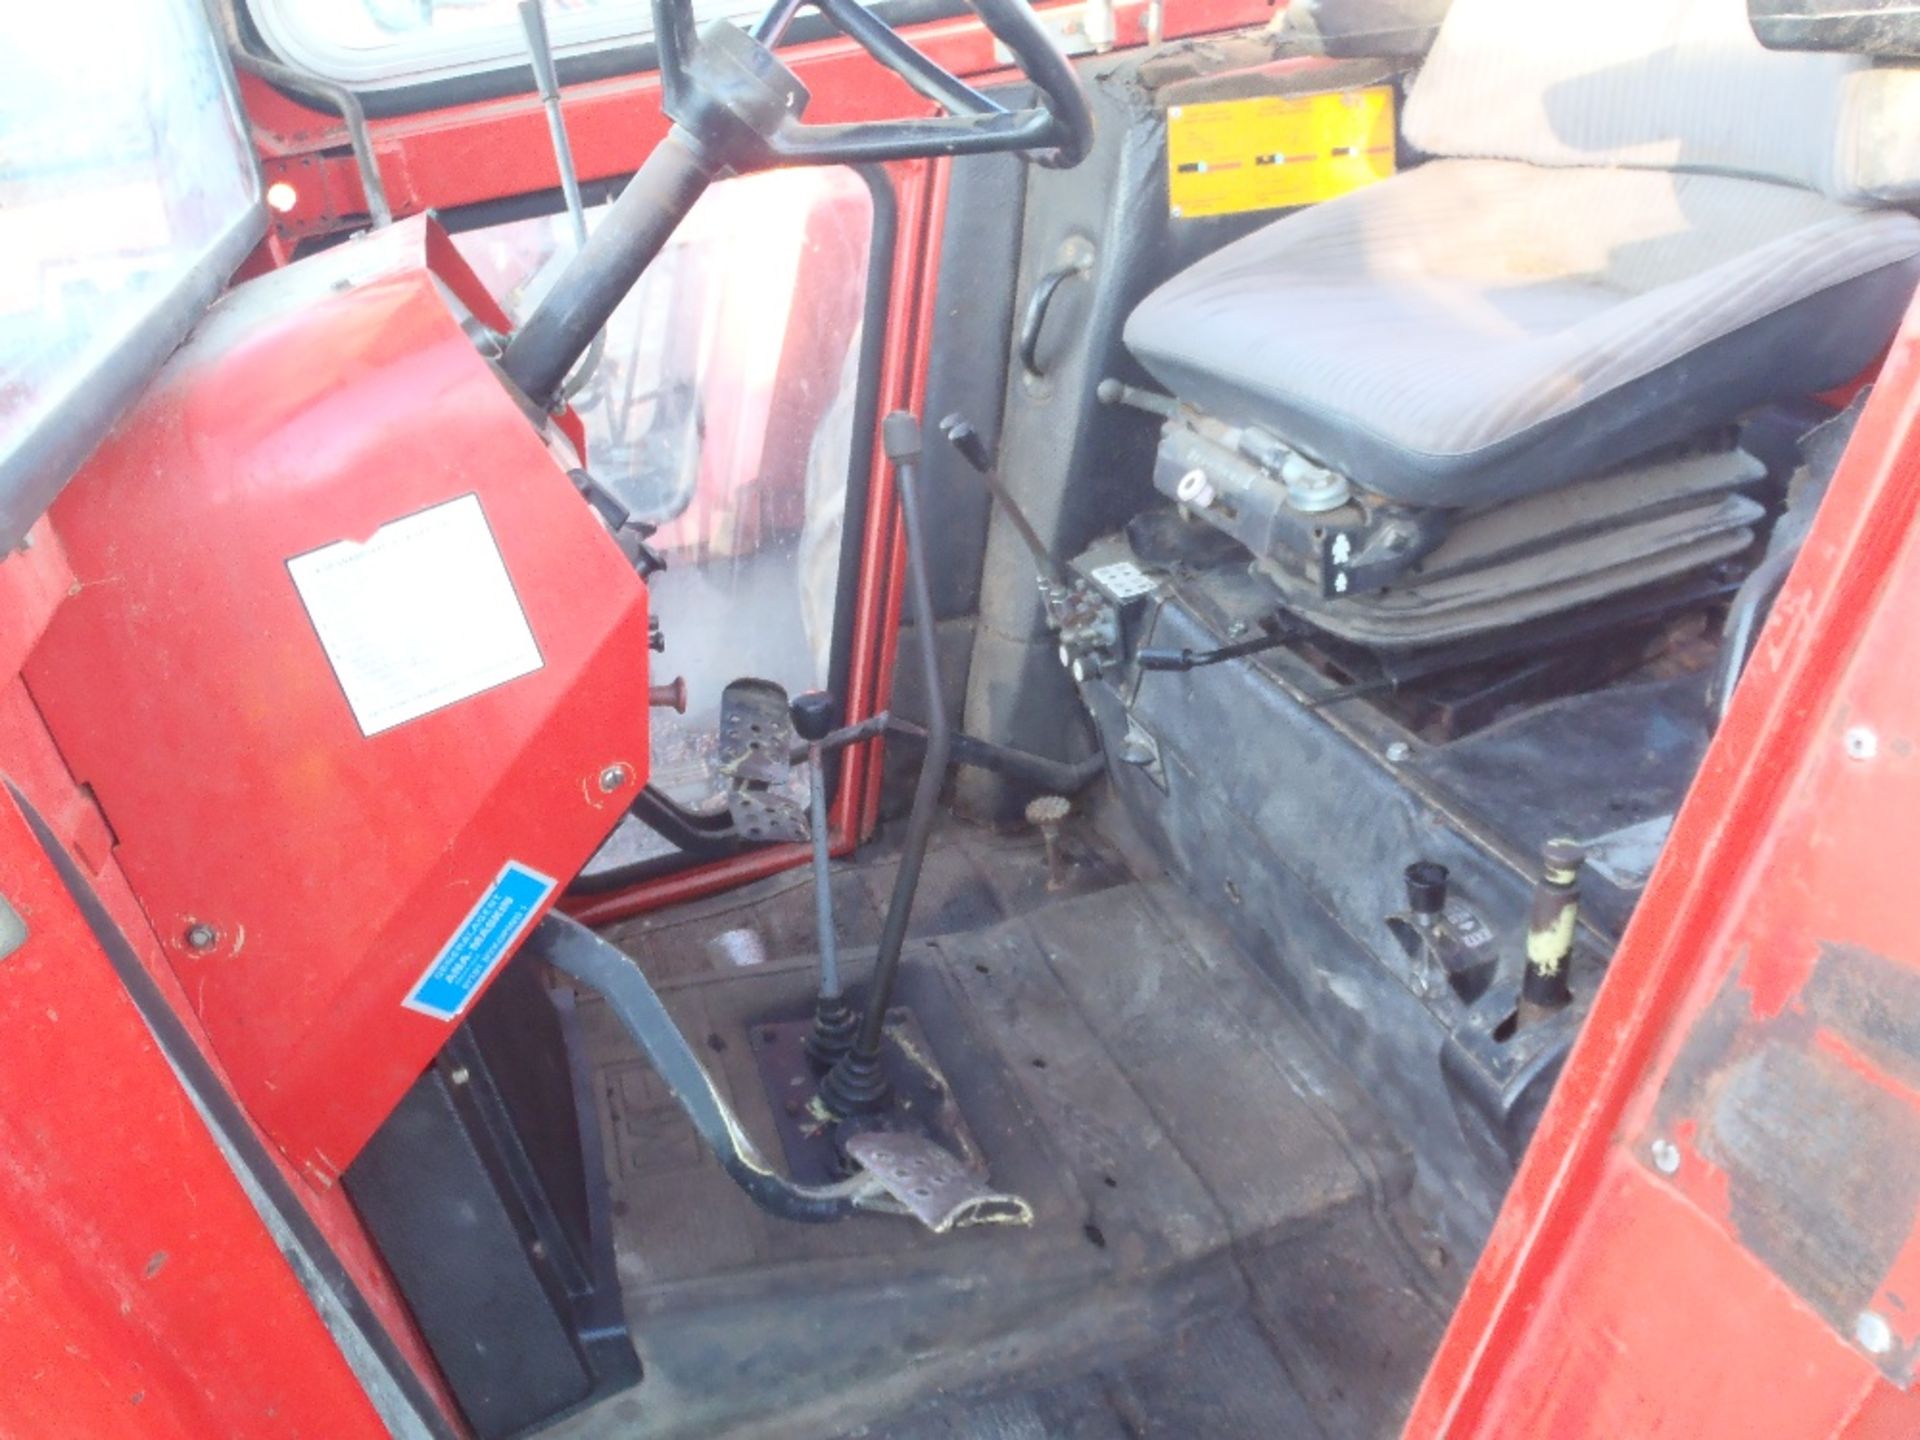 Massey Ferguson 590 4wd Tractor V5 will be supplied Ser No J195065 - Image 10 of 10